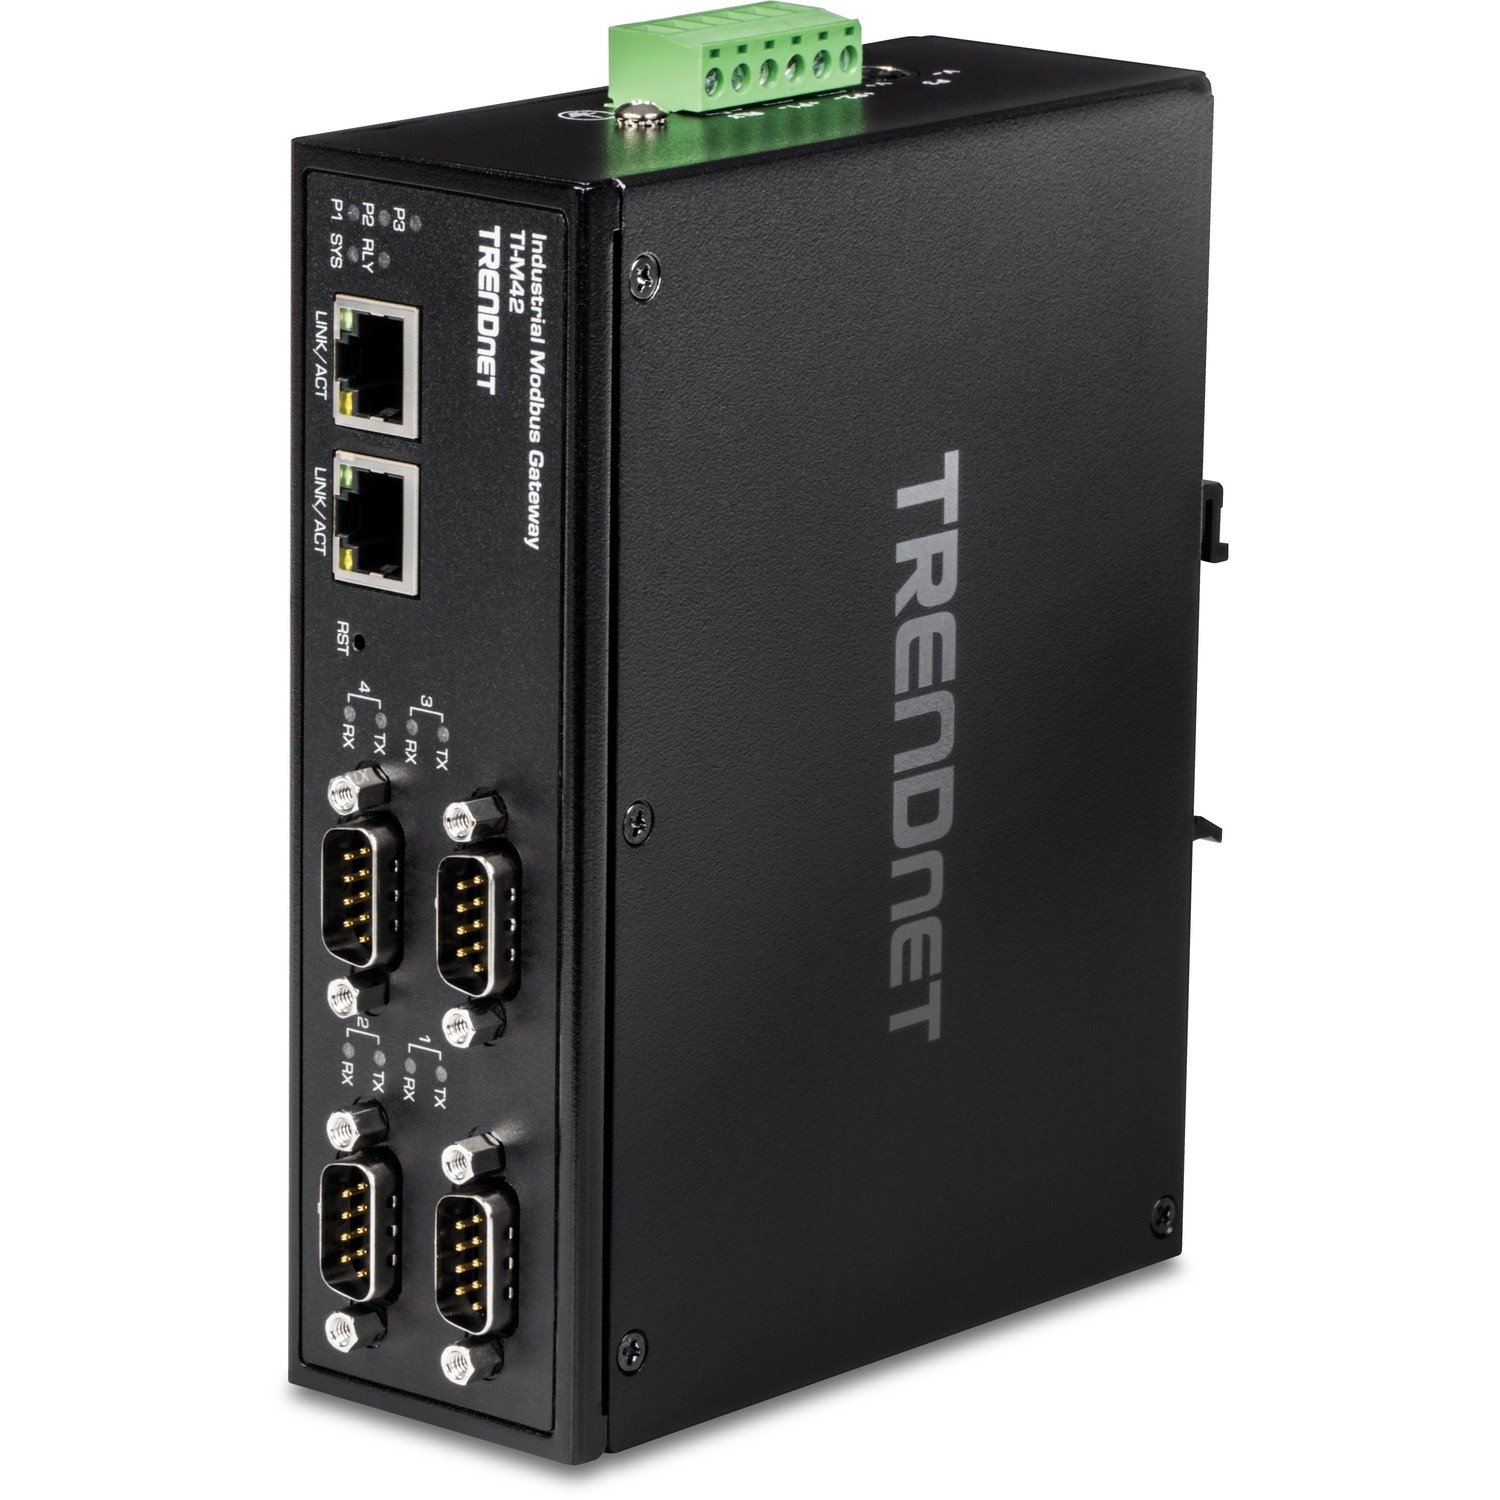 TRENDnet 4-Port Fast Ethernet Industrial Modbus Gateway, 4 x Serial DB-9 Ports, 2 x Fast Ethernet Ports, Up to 100m (328 ft), IP30 Rated Housing, Extreme Temperature Protection, Black, TI-M42